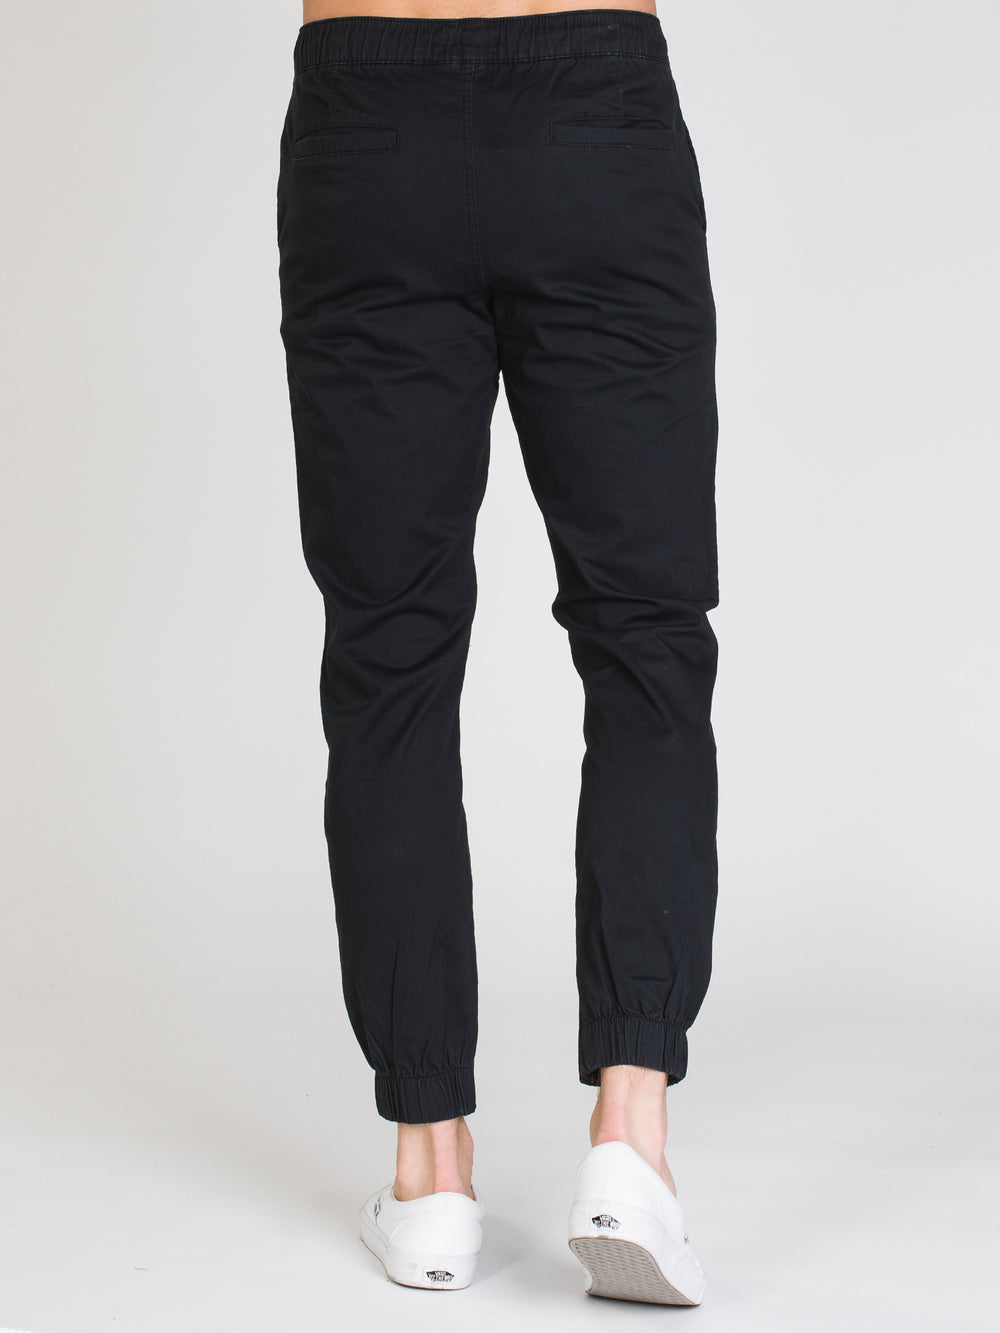 TAINTED CROCKETT RUGBY JOGGER - NAVY - CLEARANCE